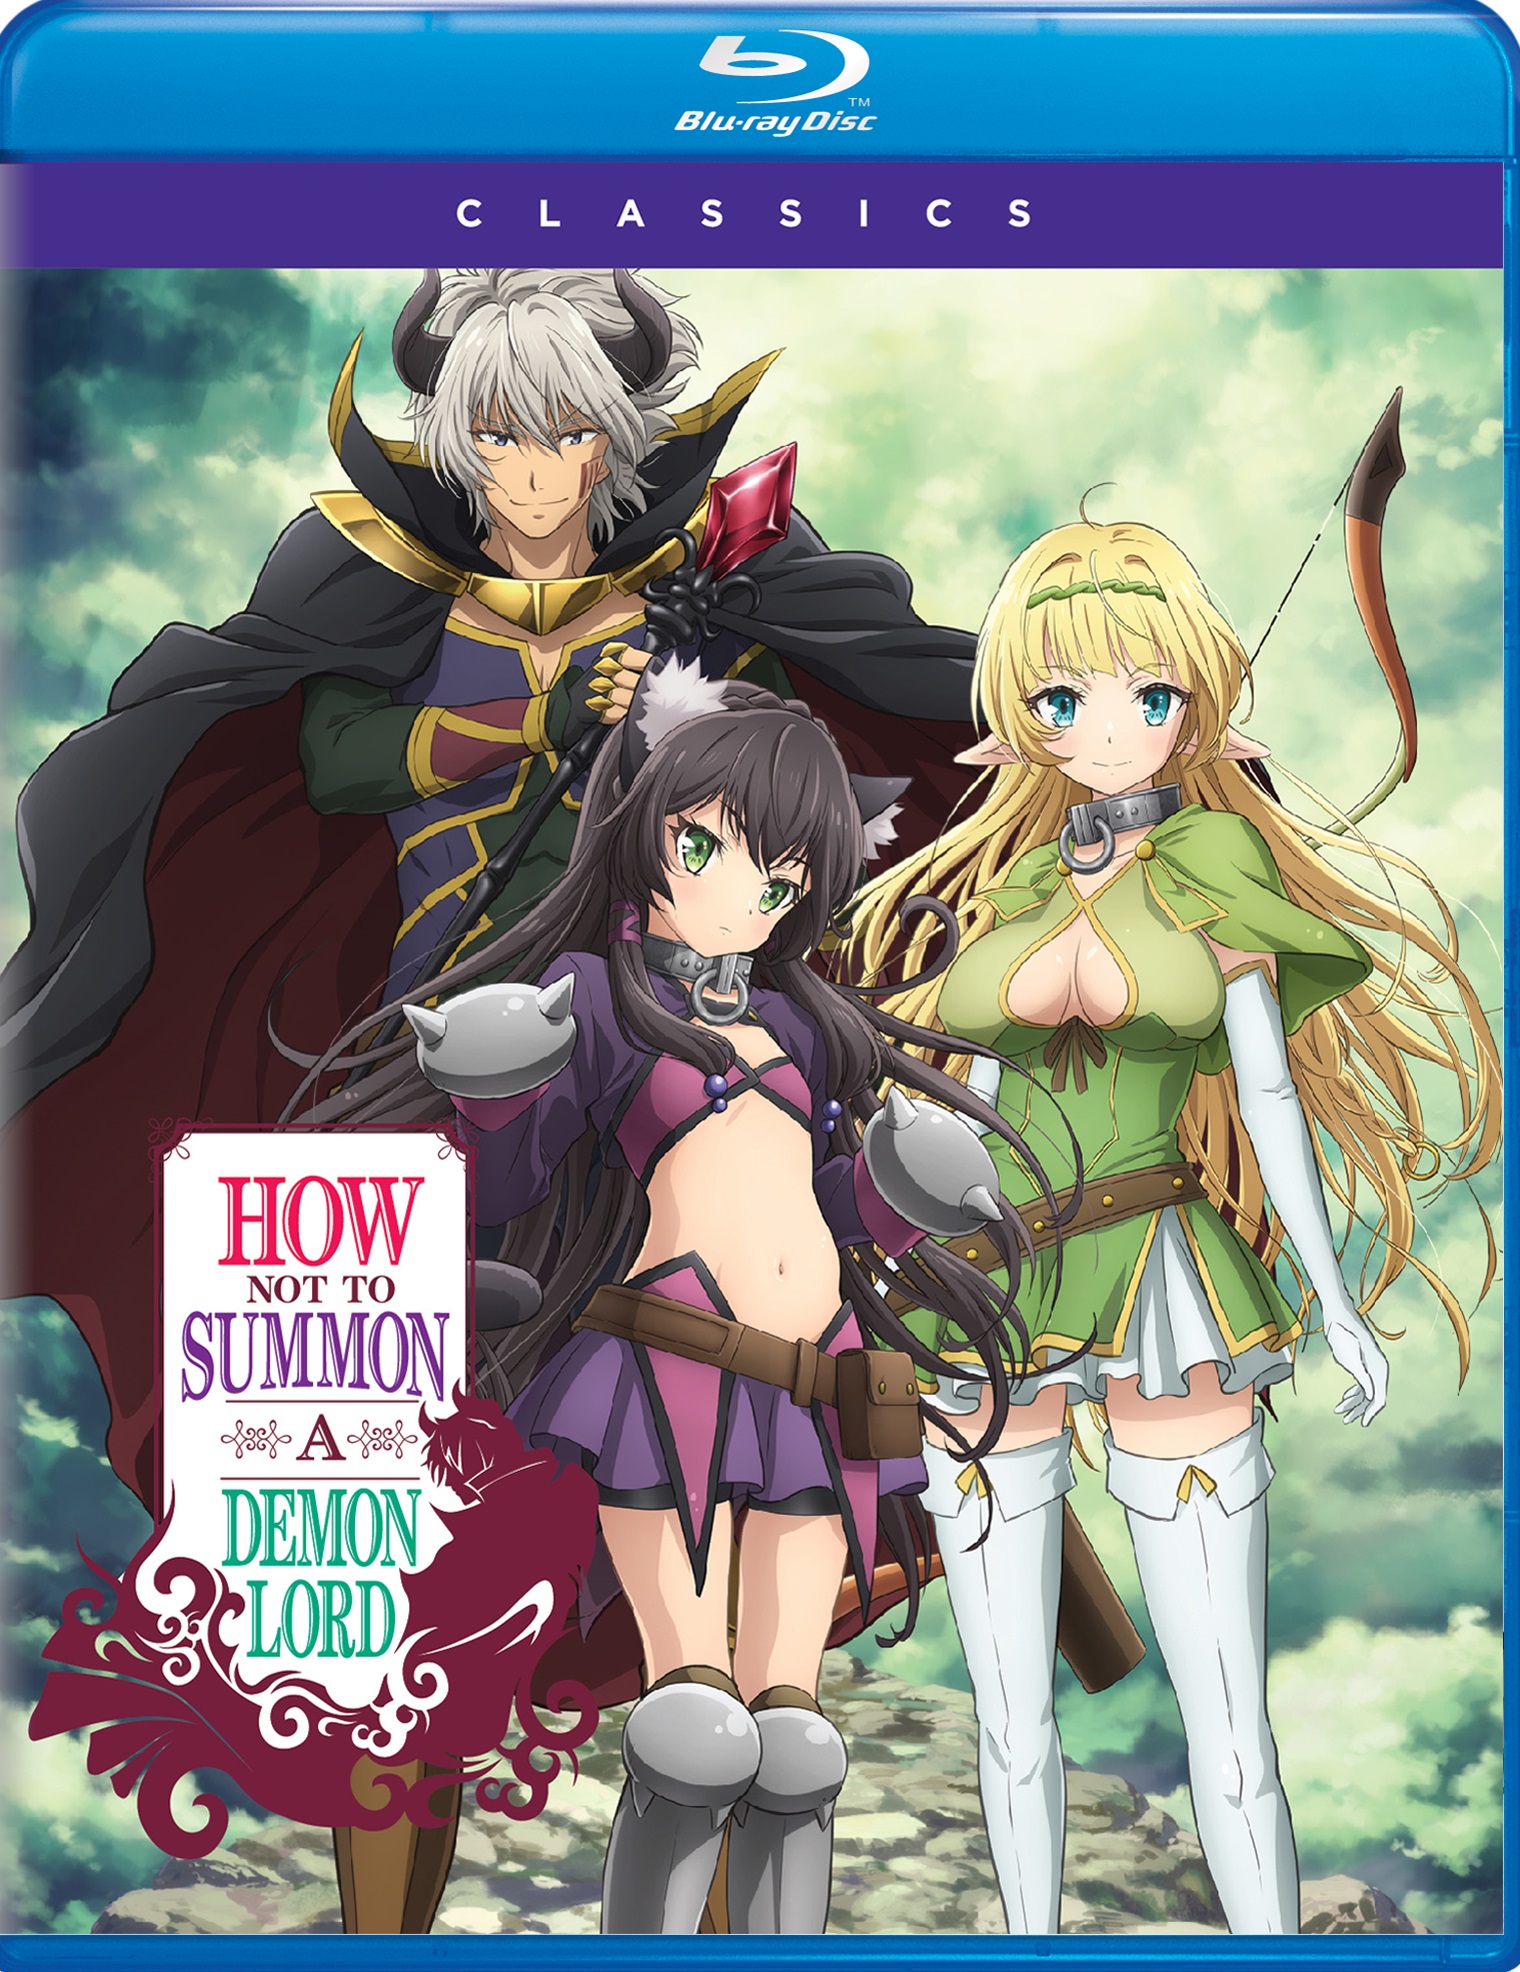 How not to summon a demon lord